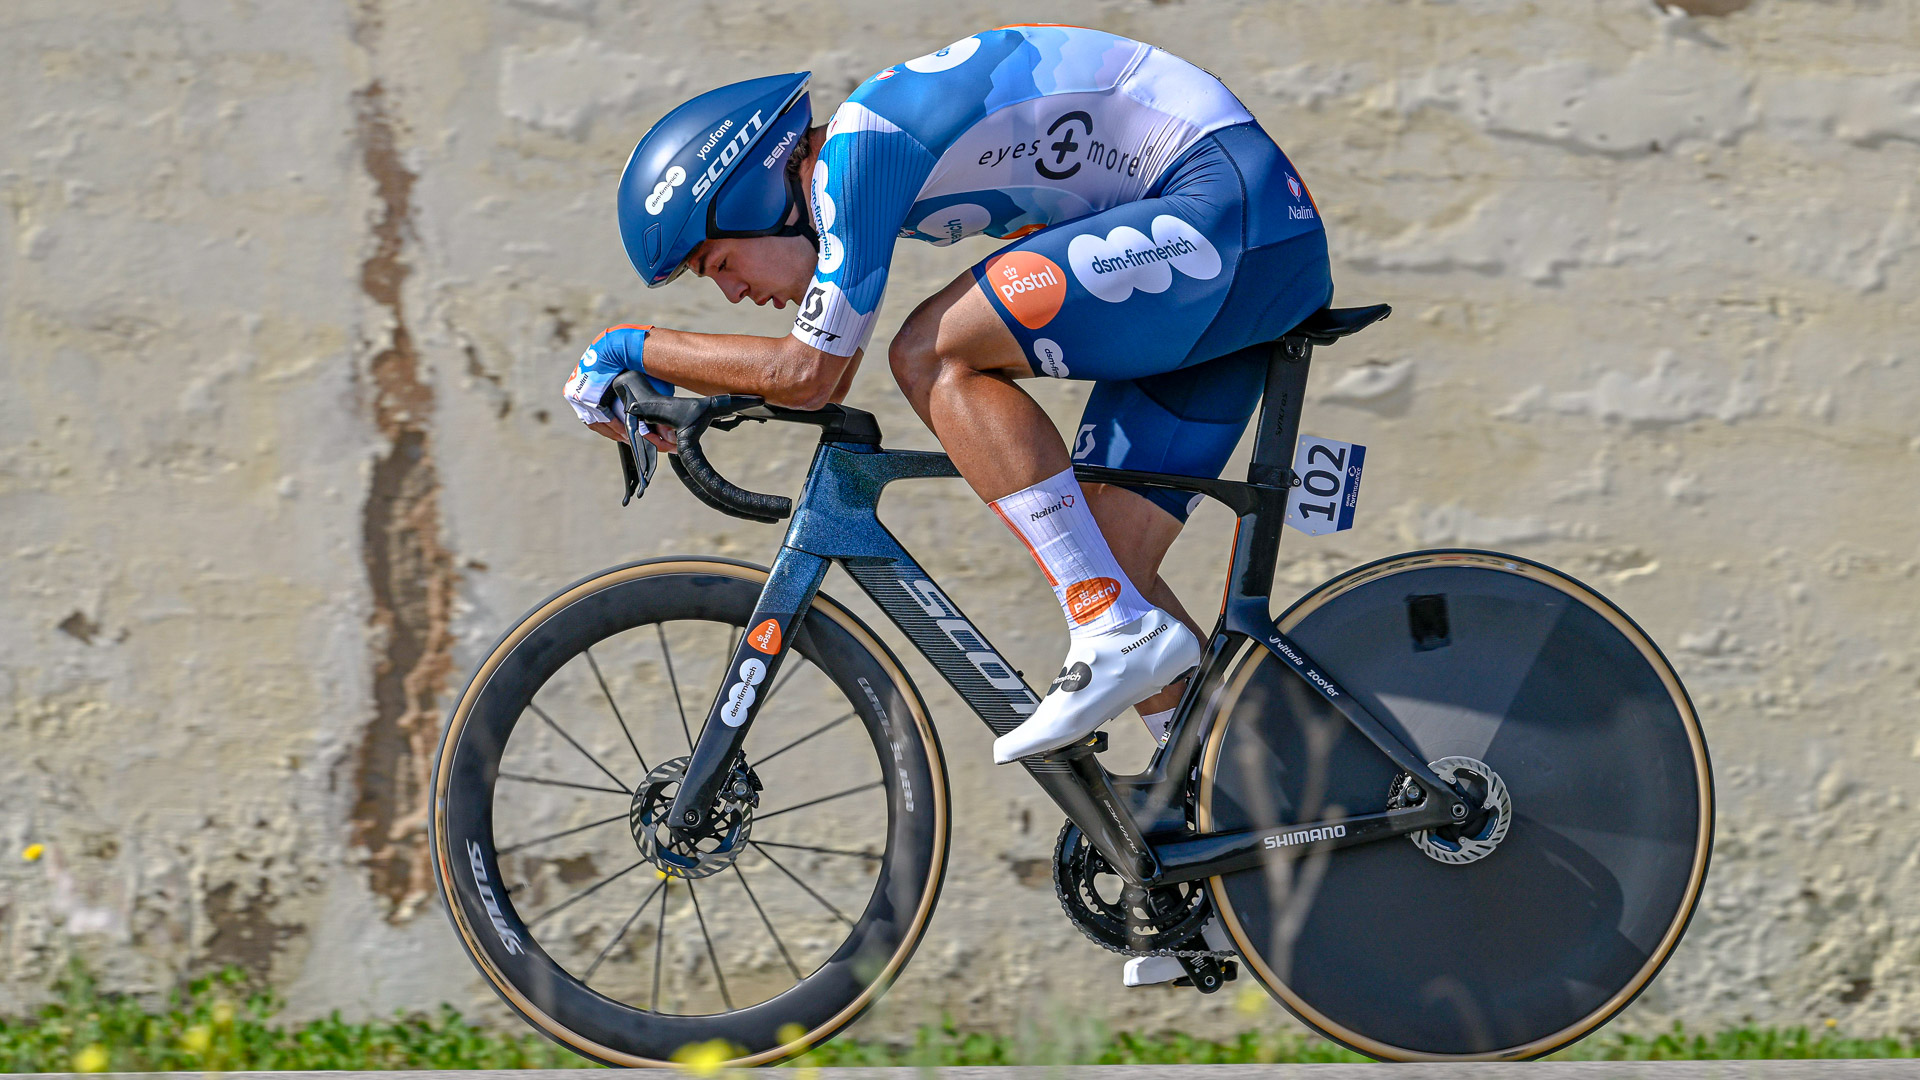 The image shows Pavel Bittner of Team dsm-firmenich PostNL time trialling on a road bike.